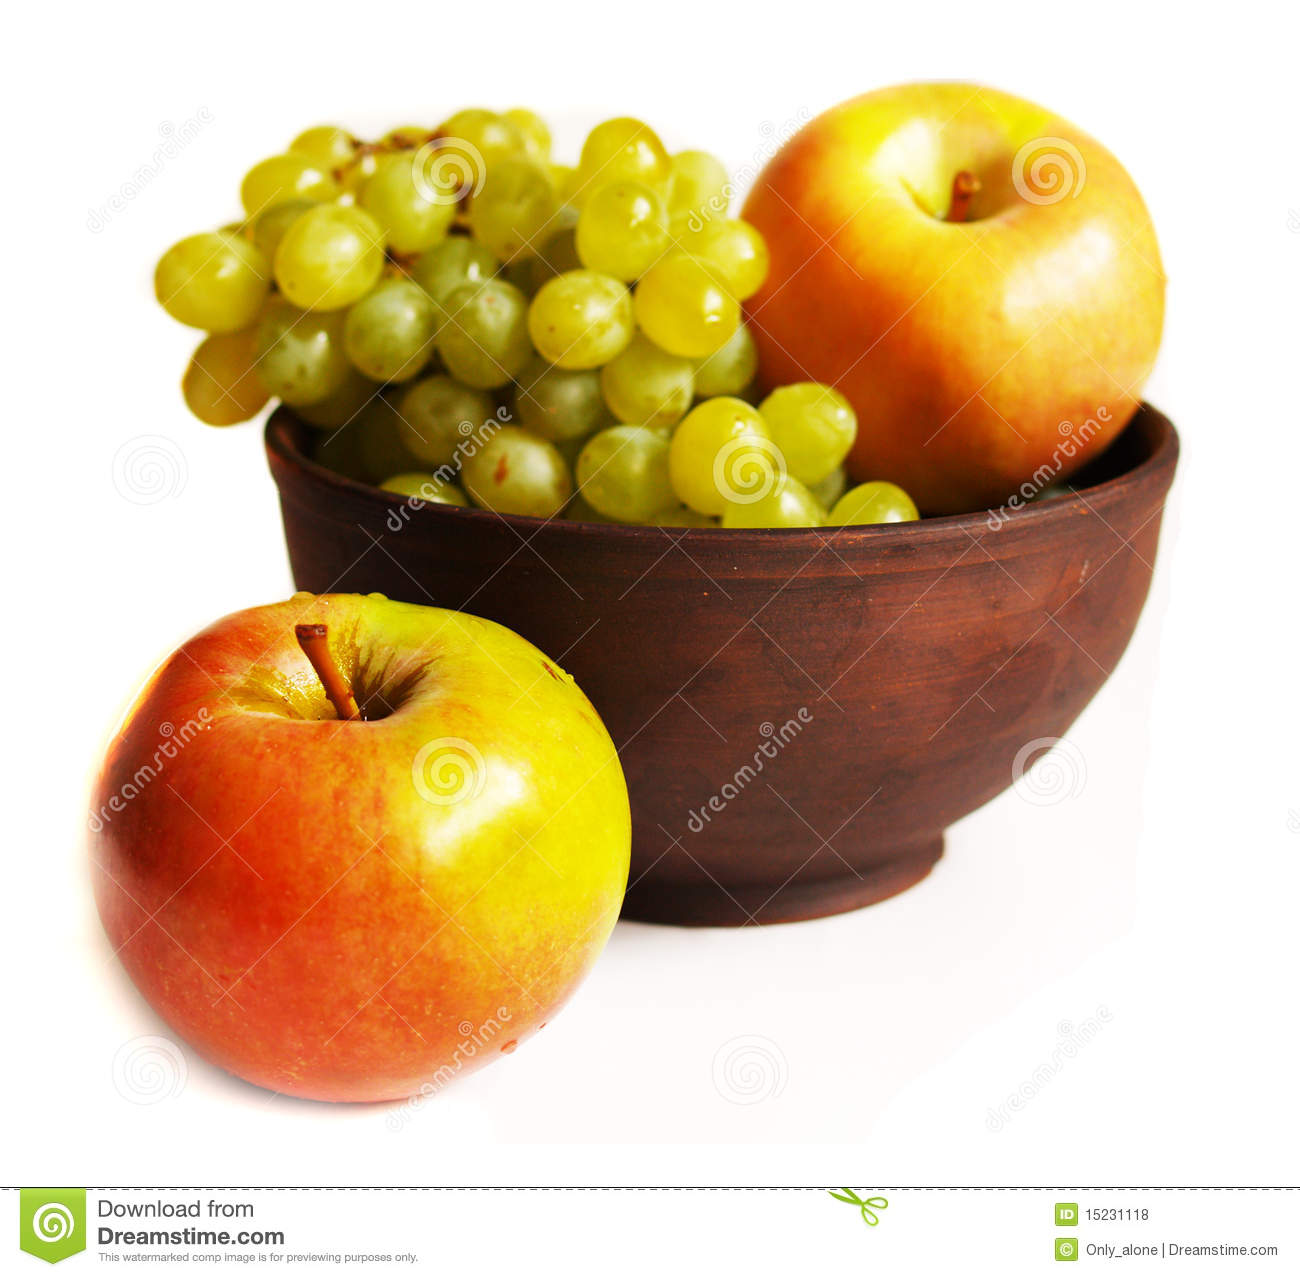 Grapes And Apples In The Clay Plate Royalty Free Stock Photos   Image